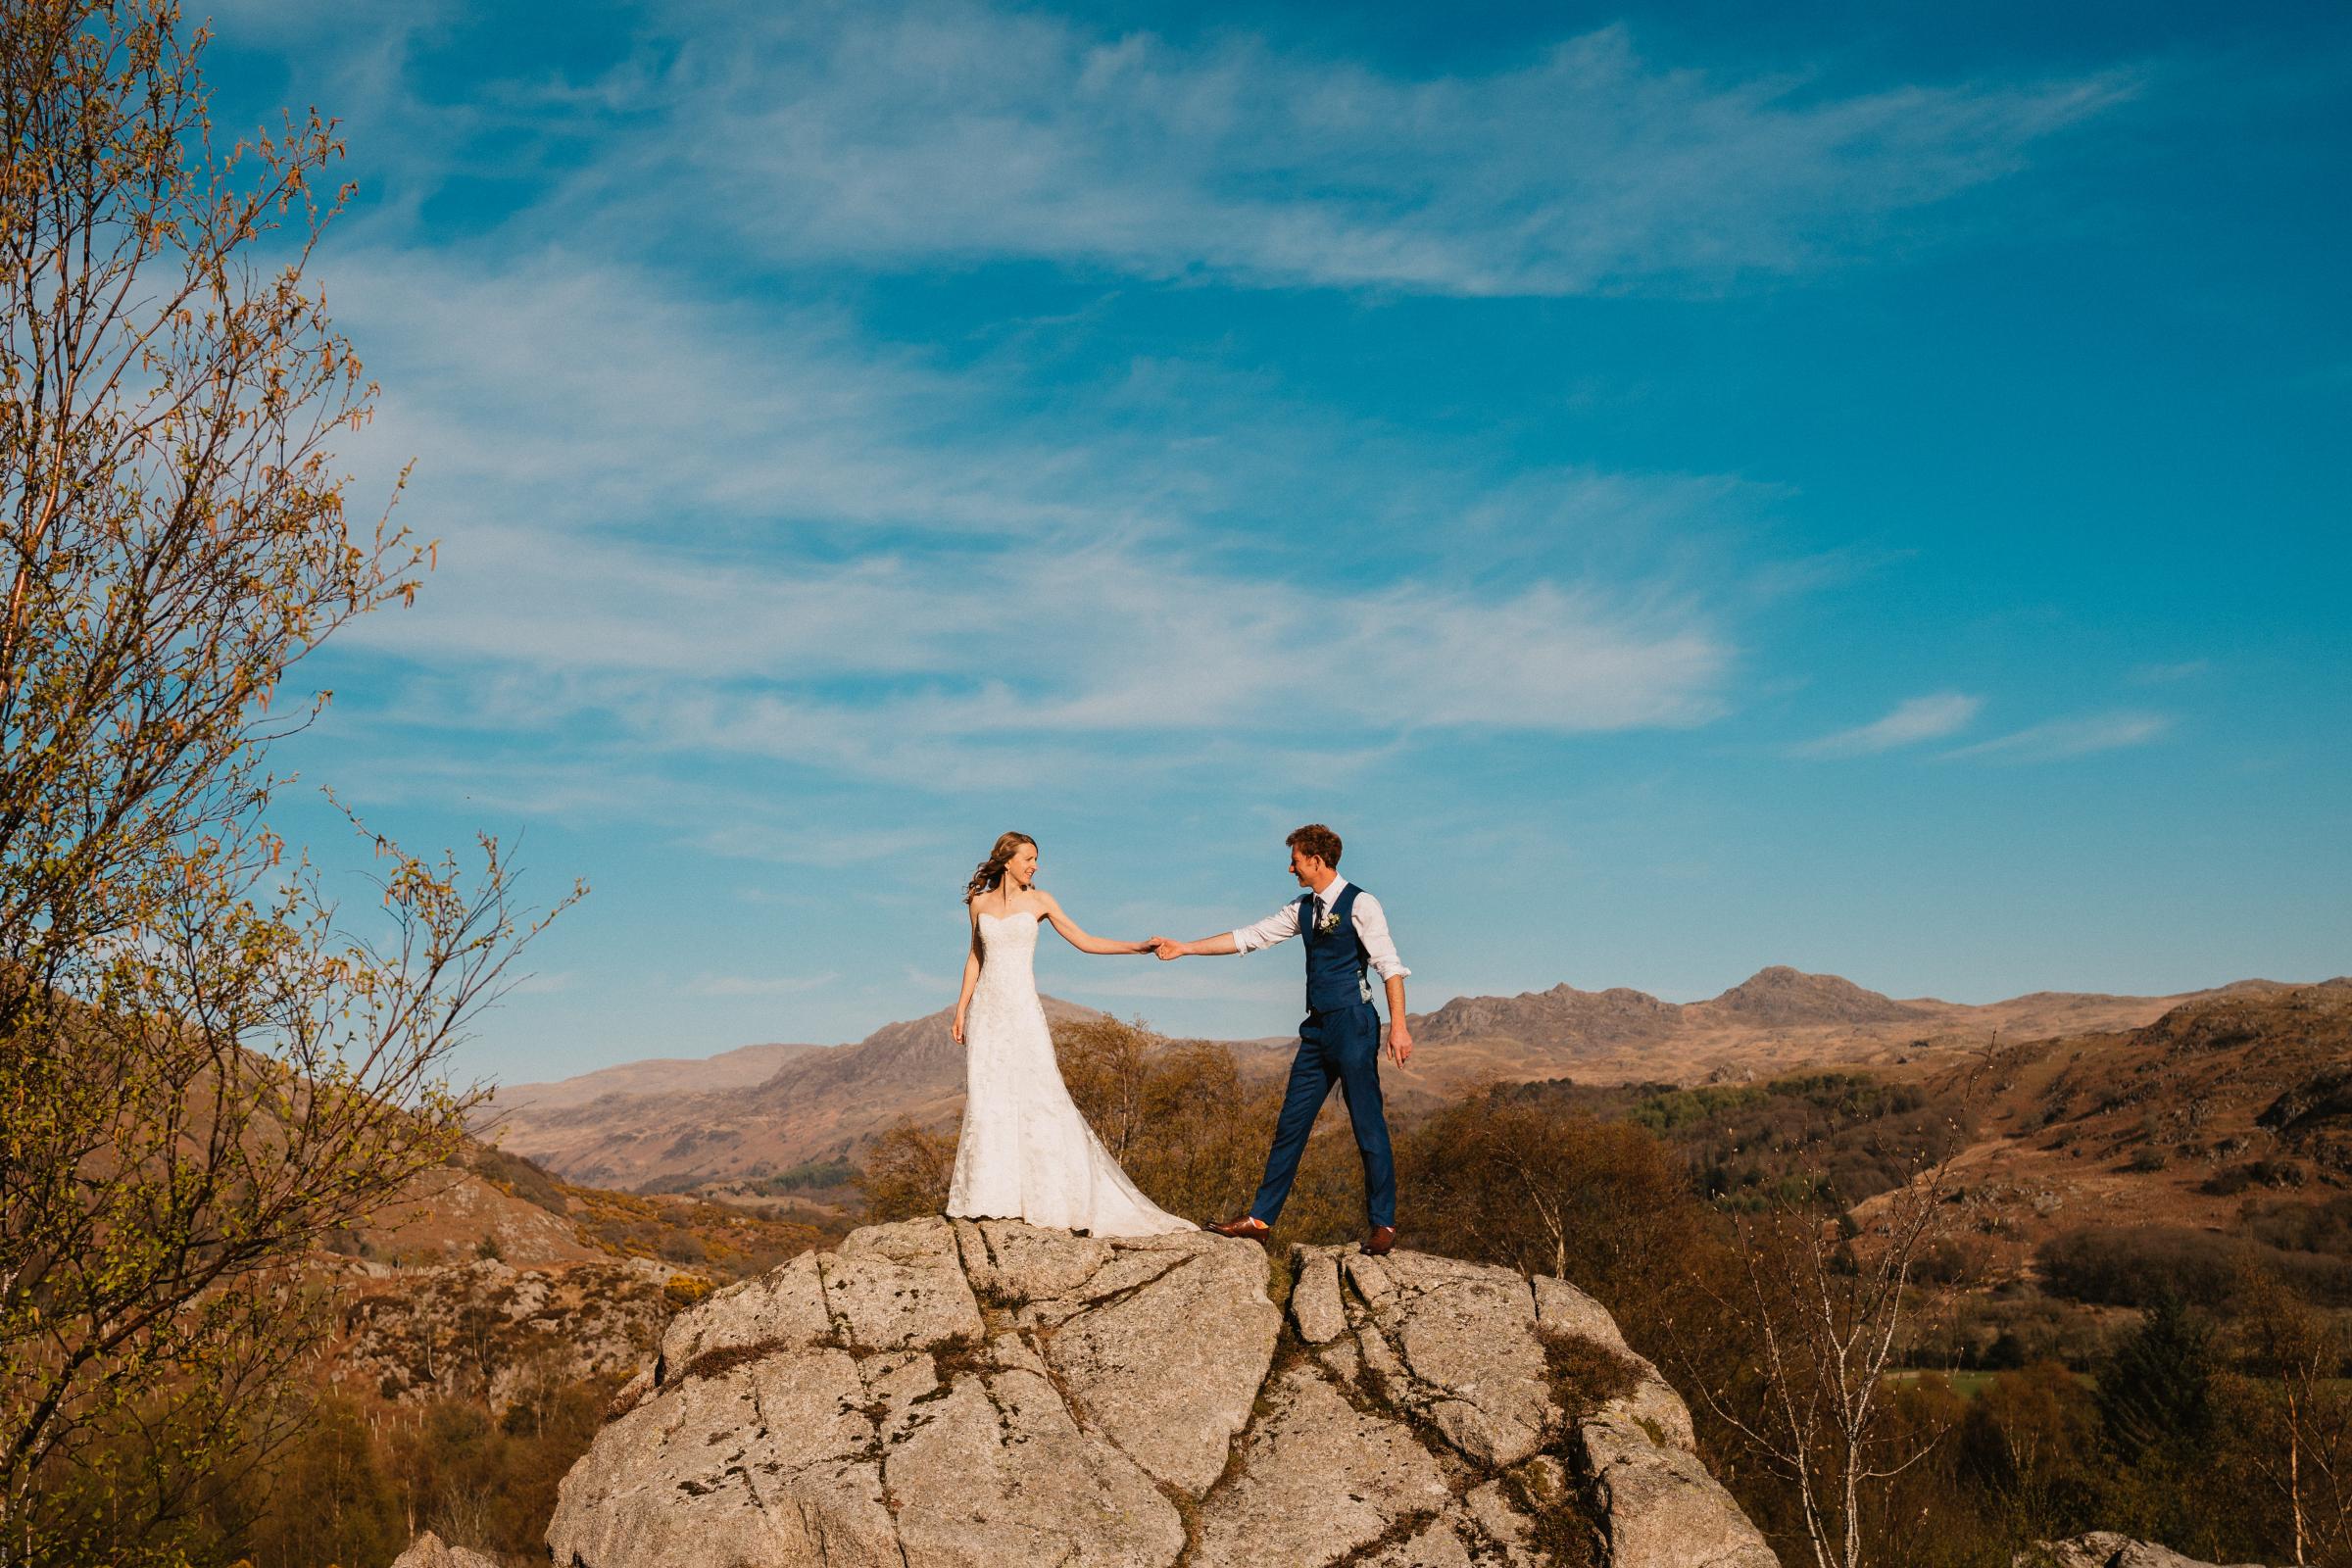 PICTURESQUE: The couple first bonded over their love of the outdoors. Photos by Adam Tranter Photography